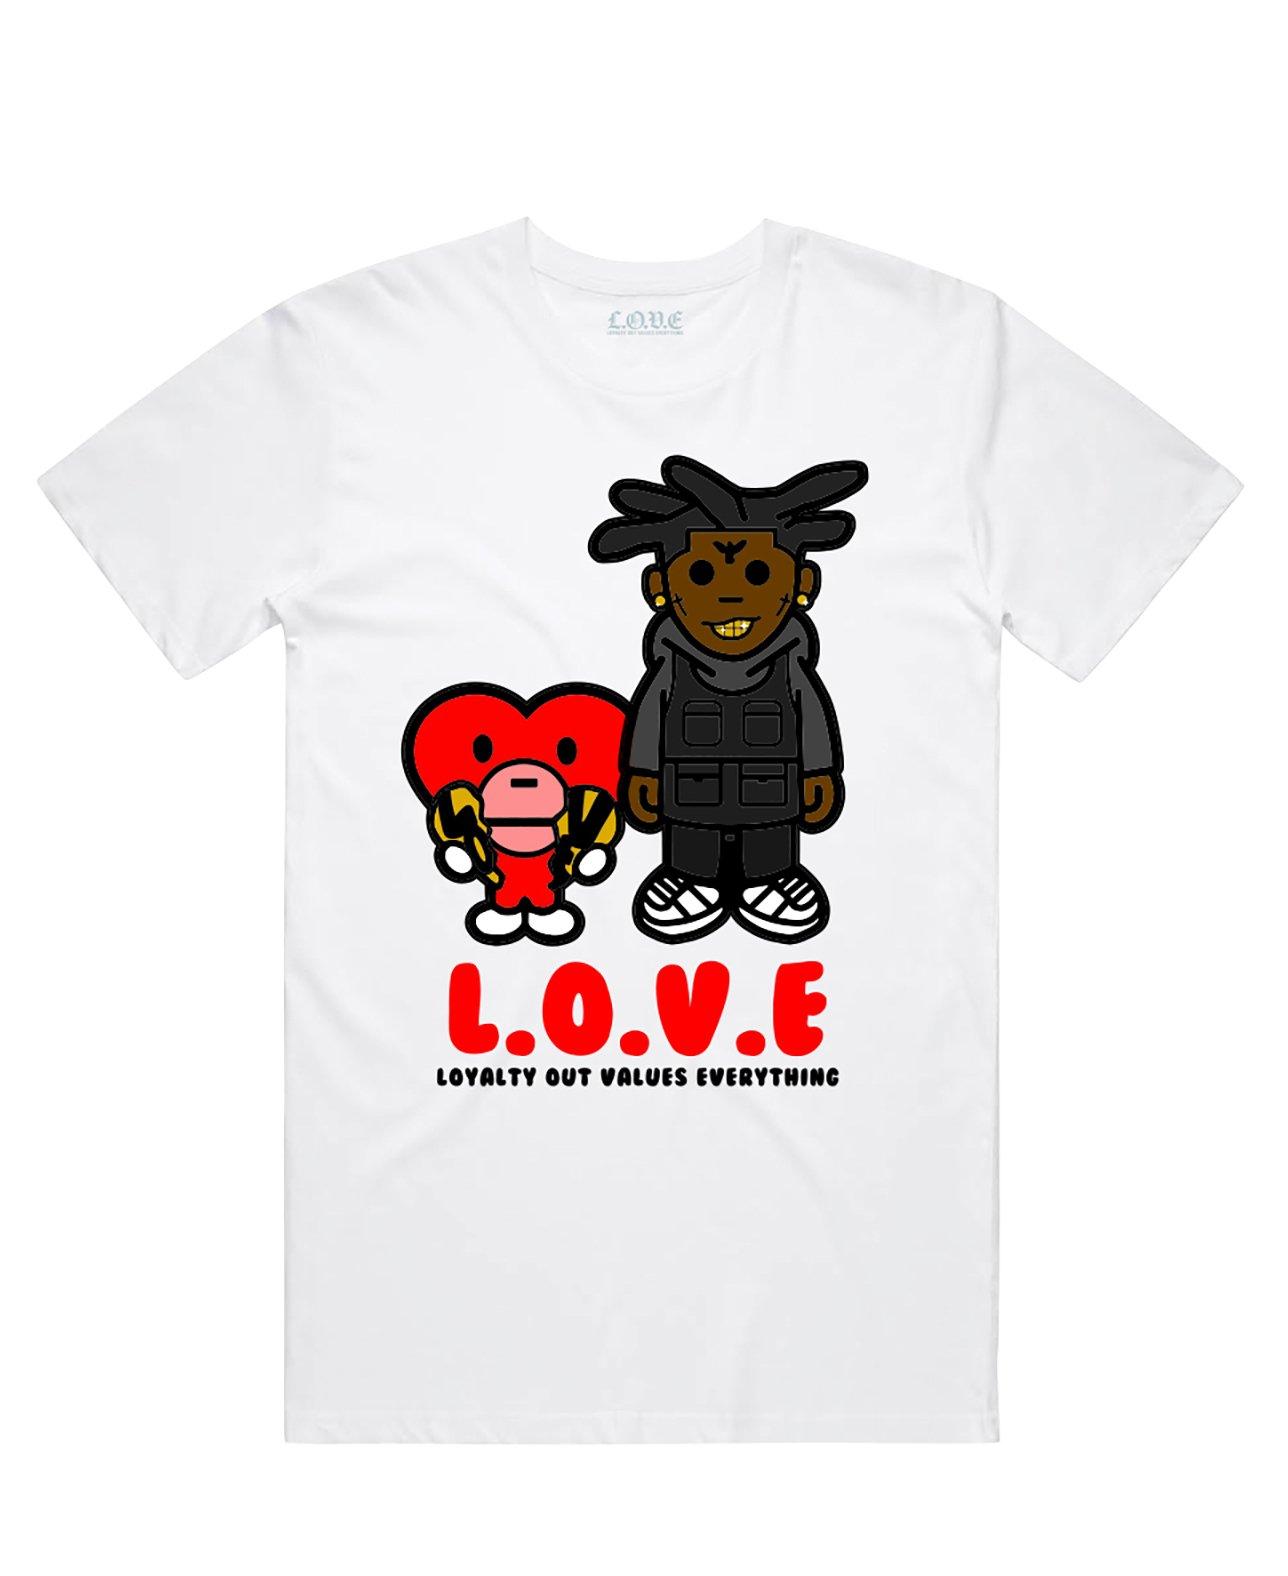 Love is a Verb (Cotton Candy hat) – Judah Life Apparel